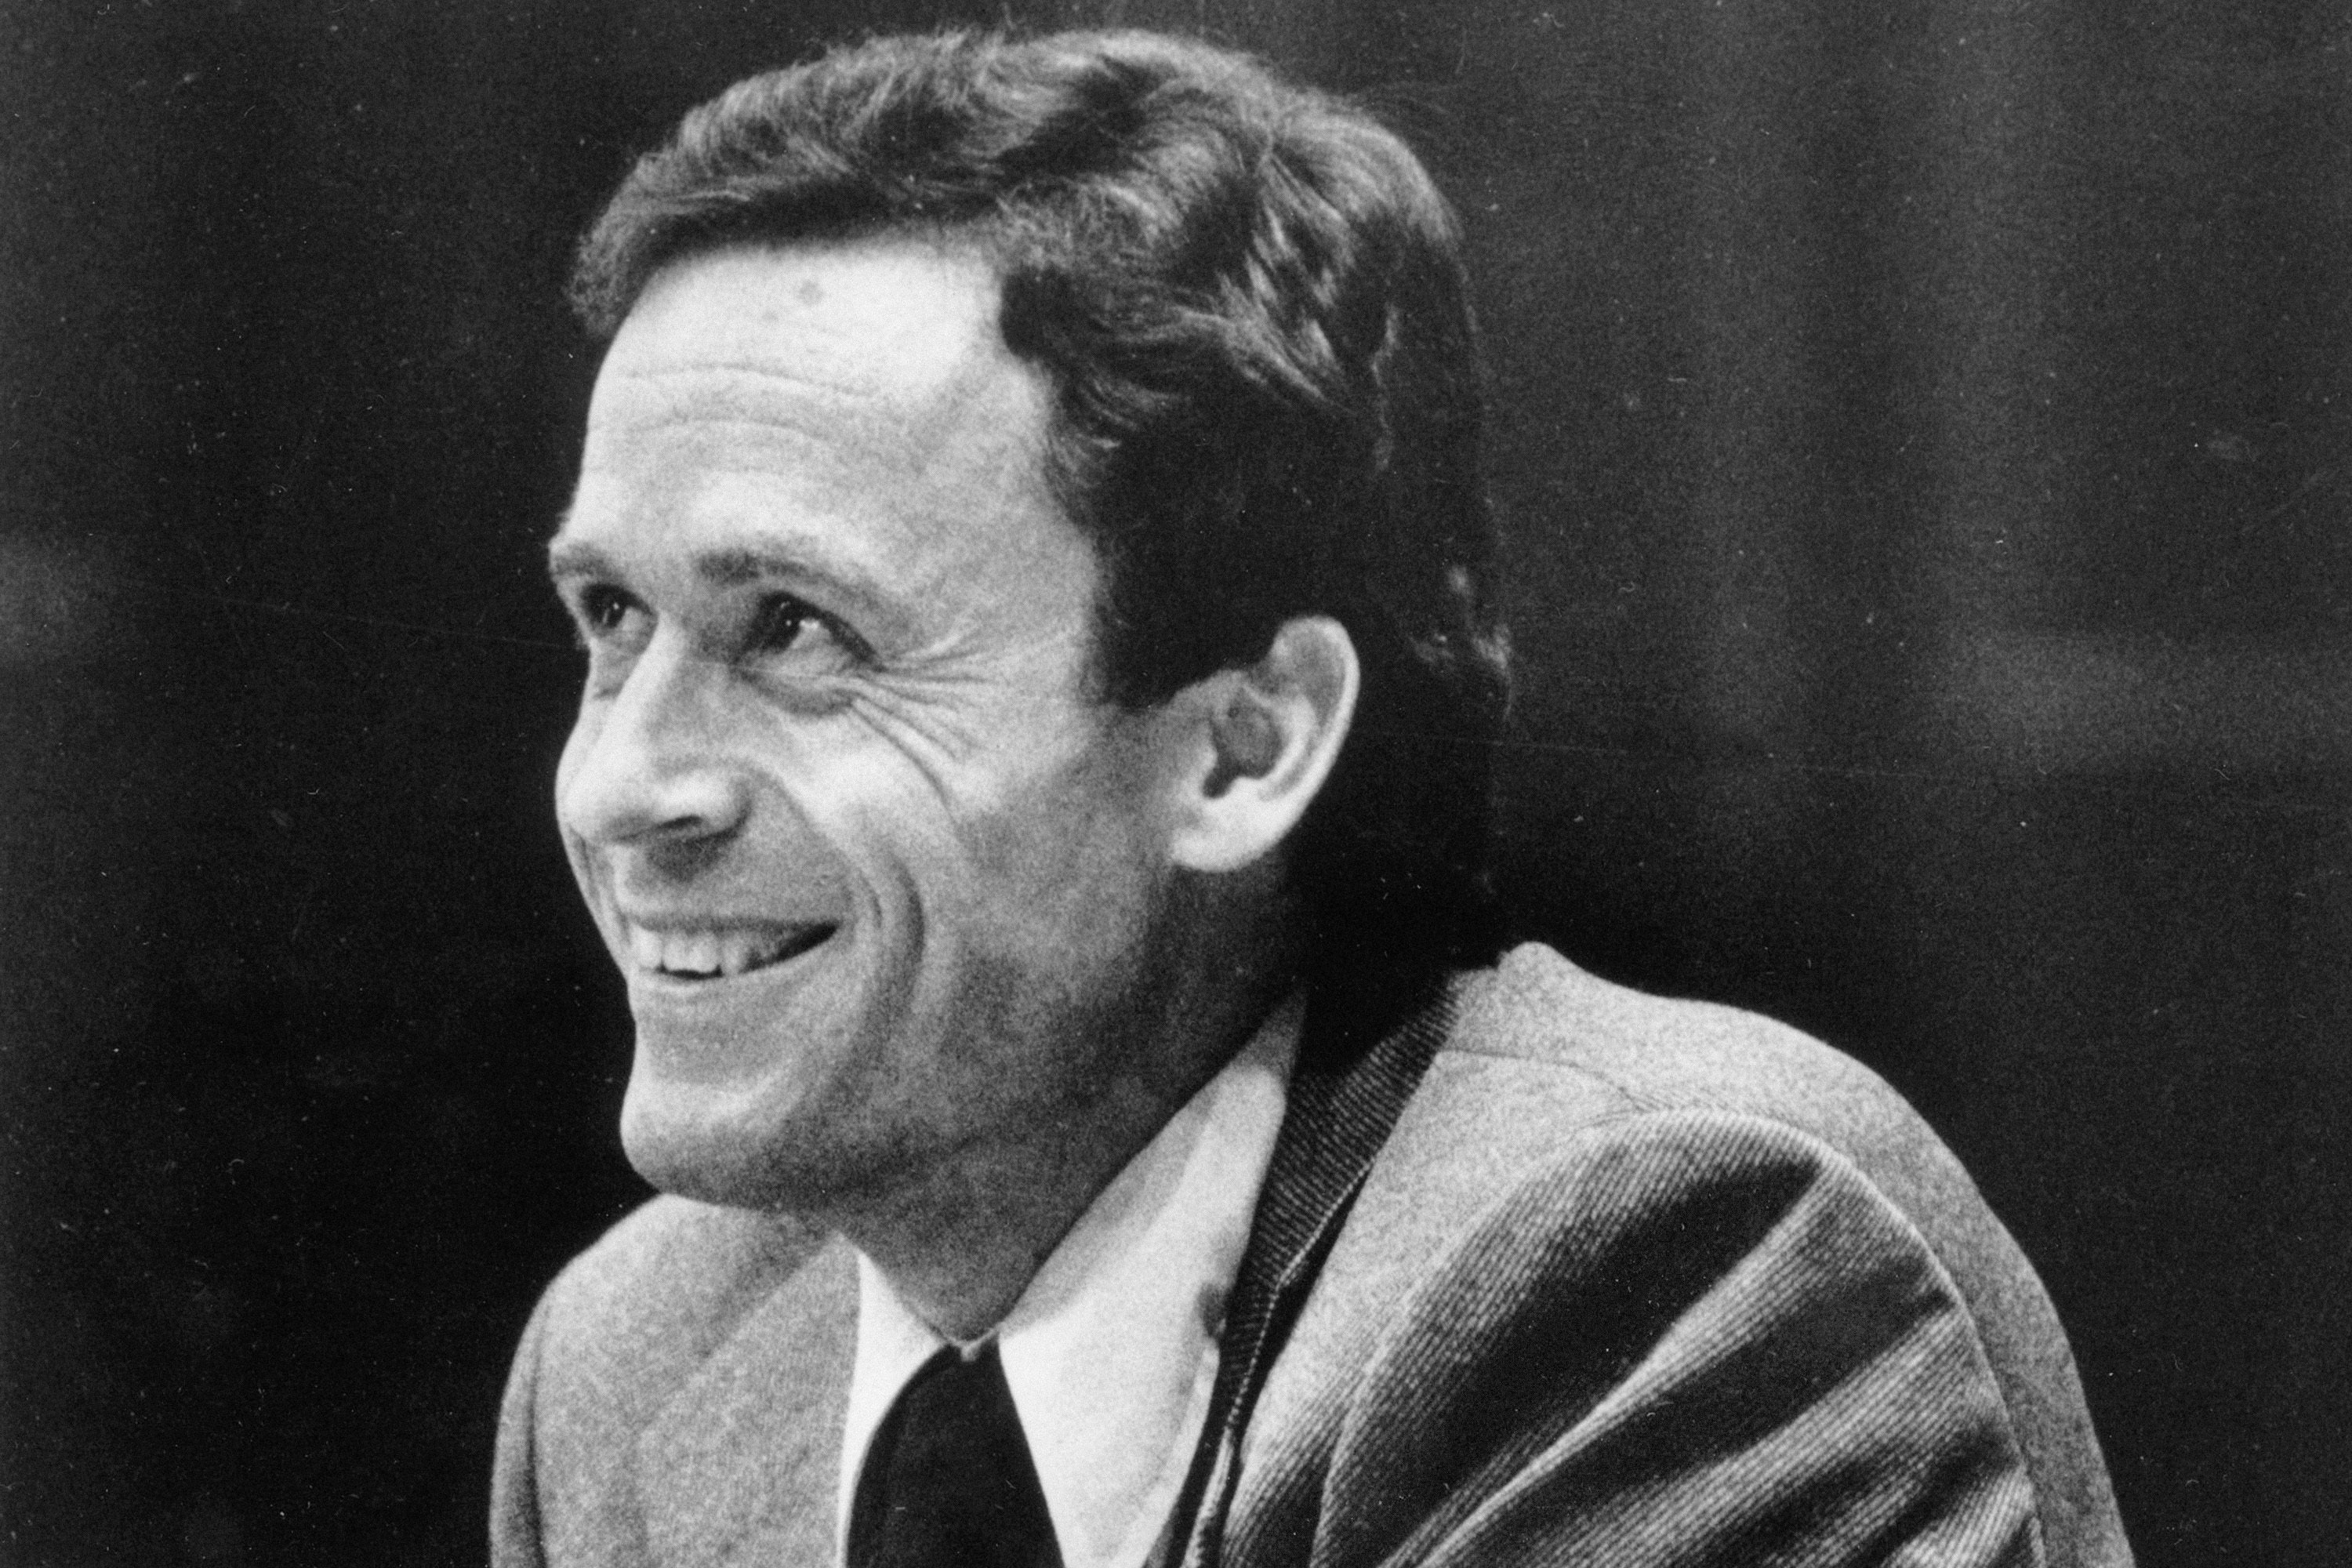 ted-bundy-s-murderous-charm-still-polarizes-40-years-later